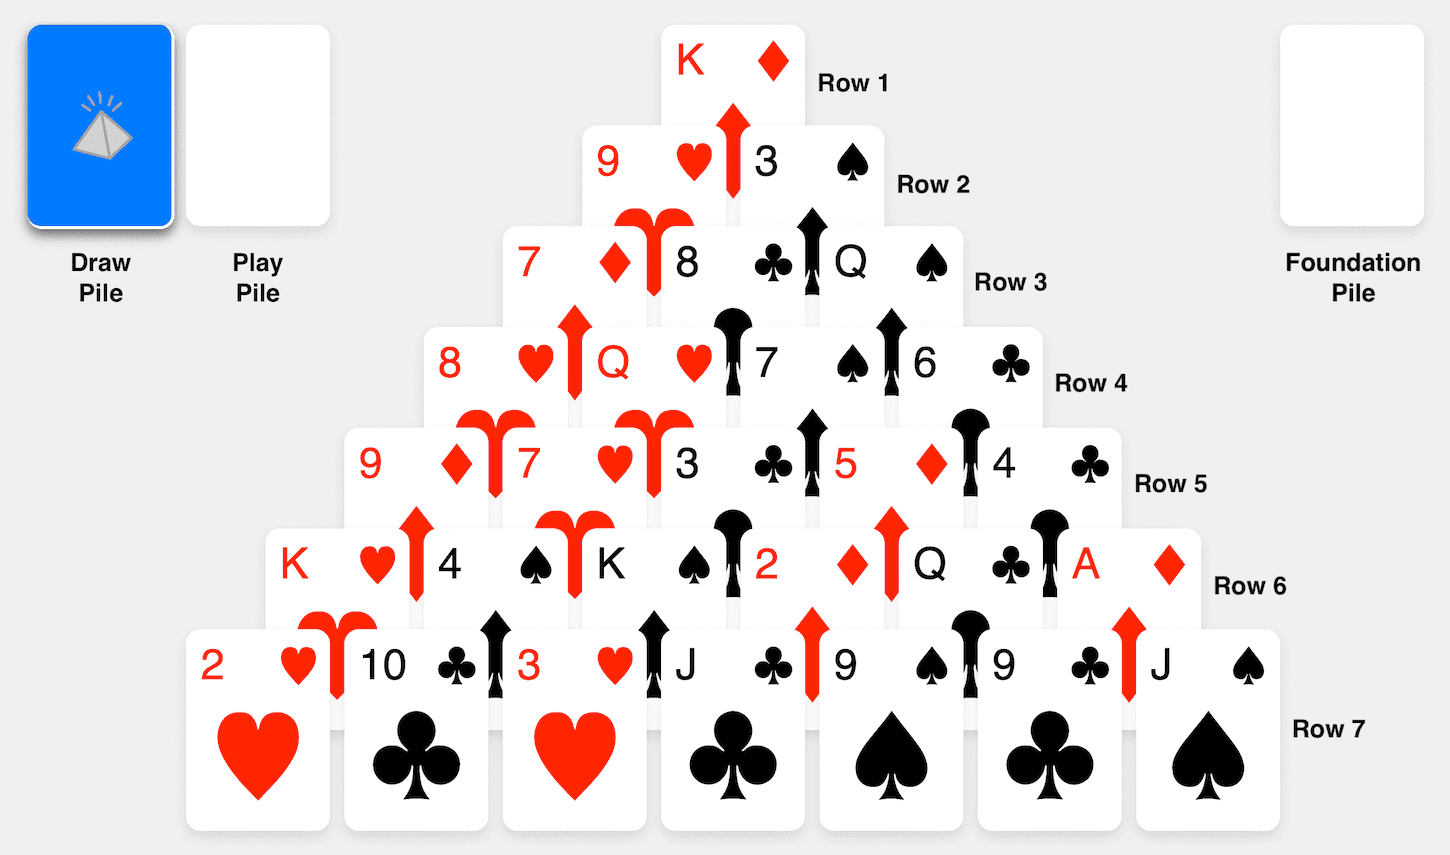 This is how the Pyramid Solitaire game is set up